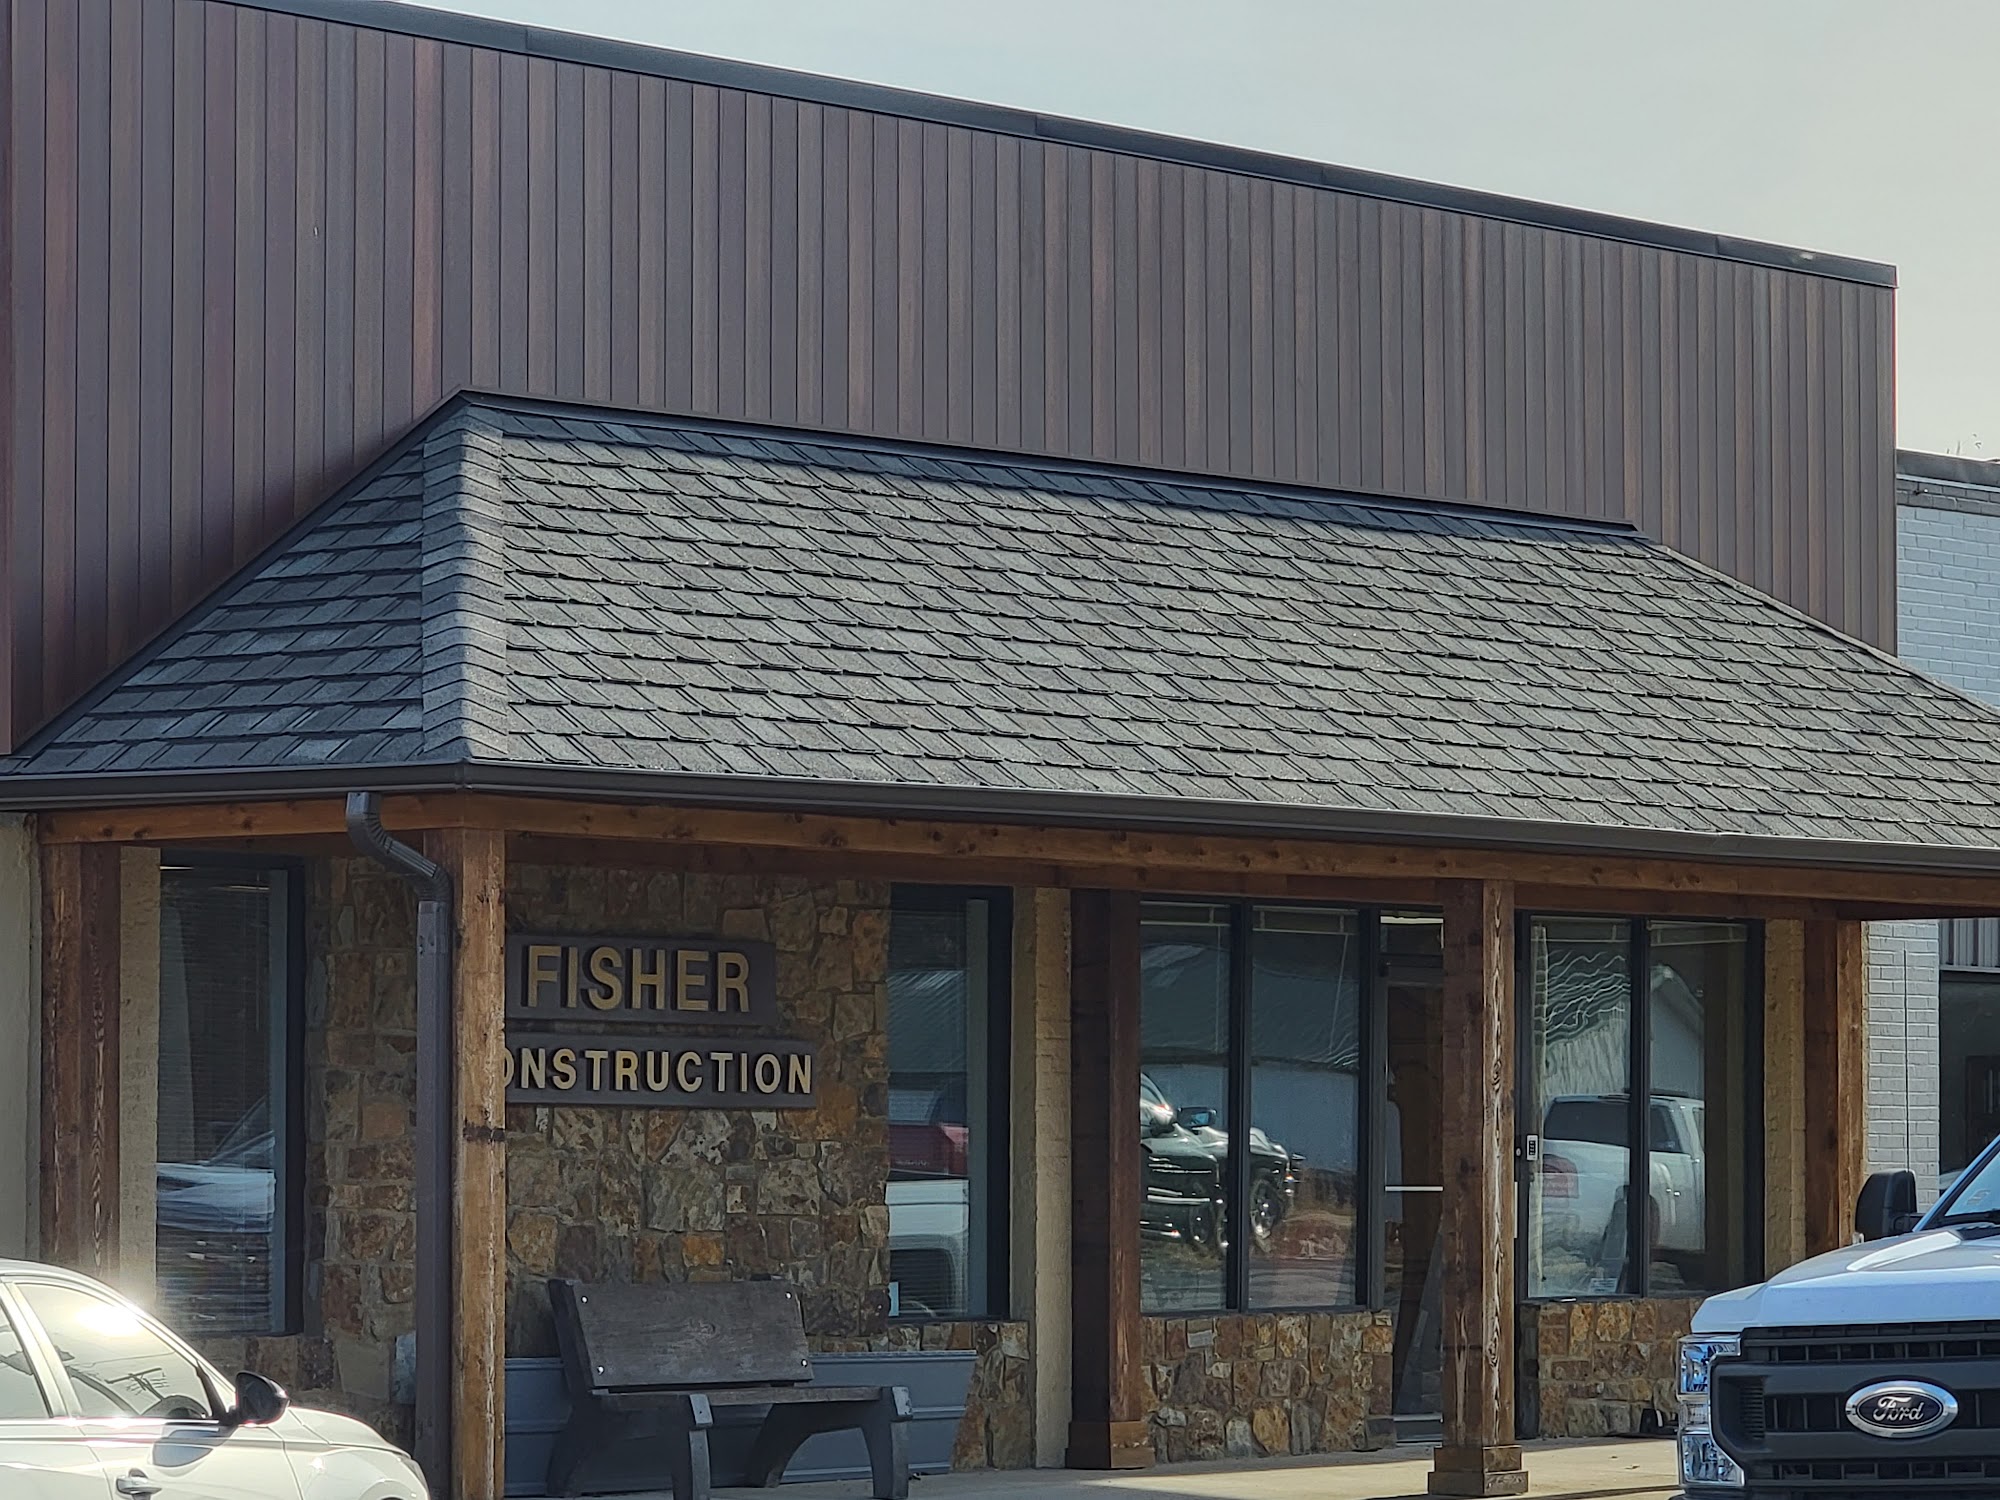 Fisher Construction Co 1167 Williamson St, Milan Tennessee 38358